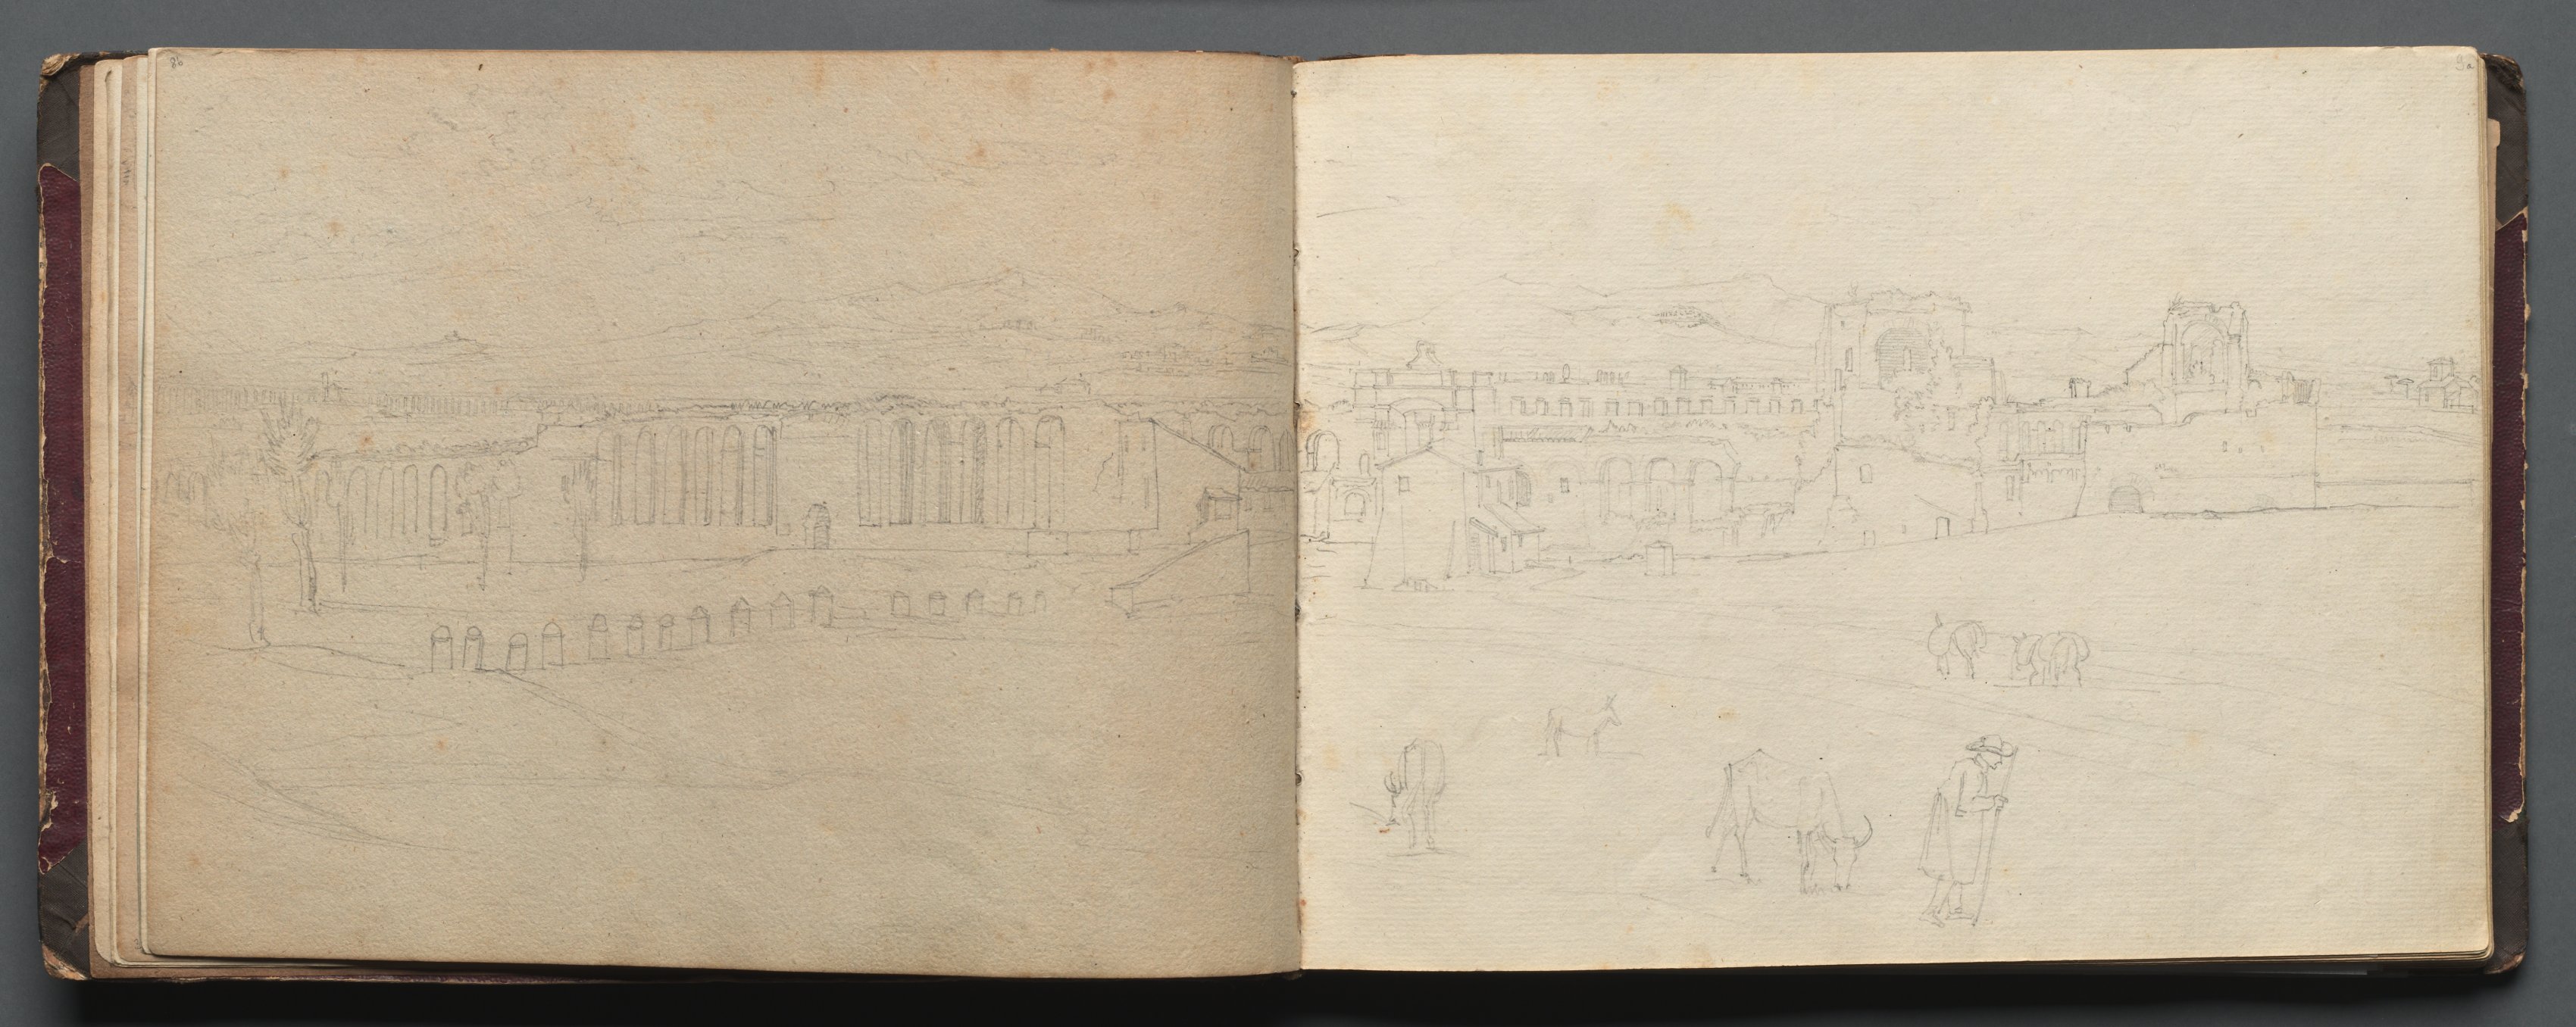 Album with Views of Rome and Surroundings, Landscape Studies, page 08b and 09 a: Panoramic view of Rome